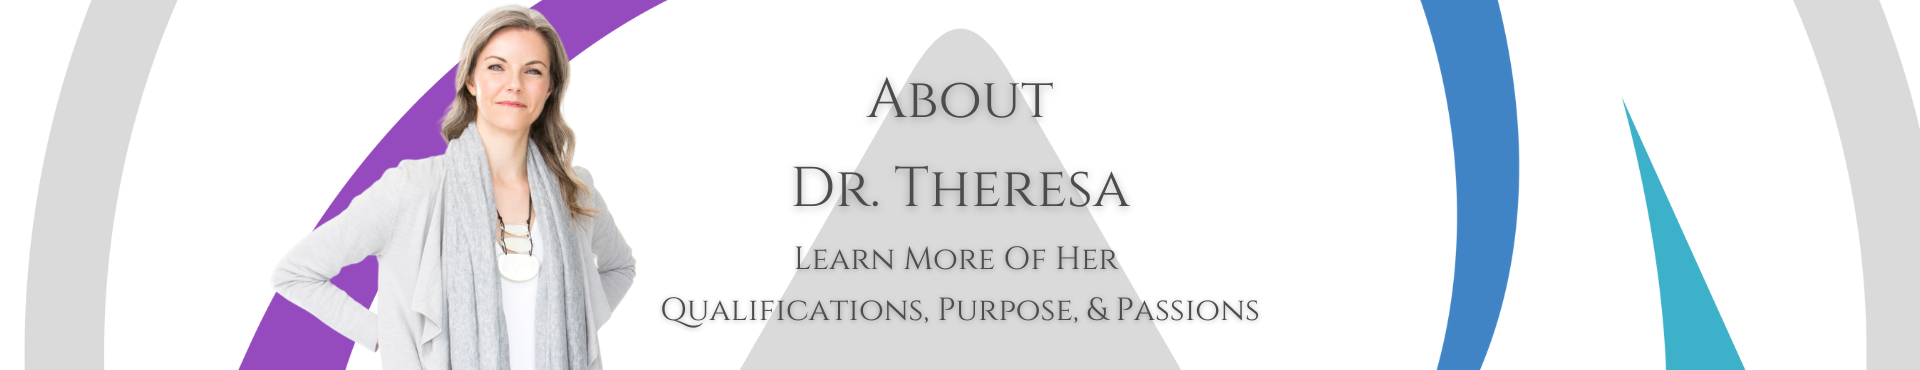 About Dr. Theresa